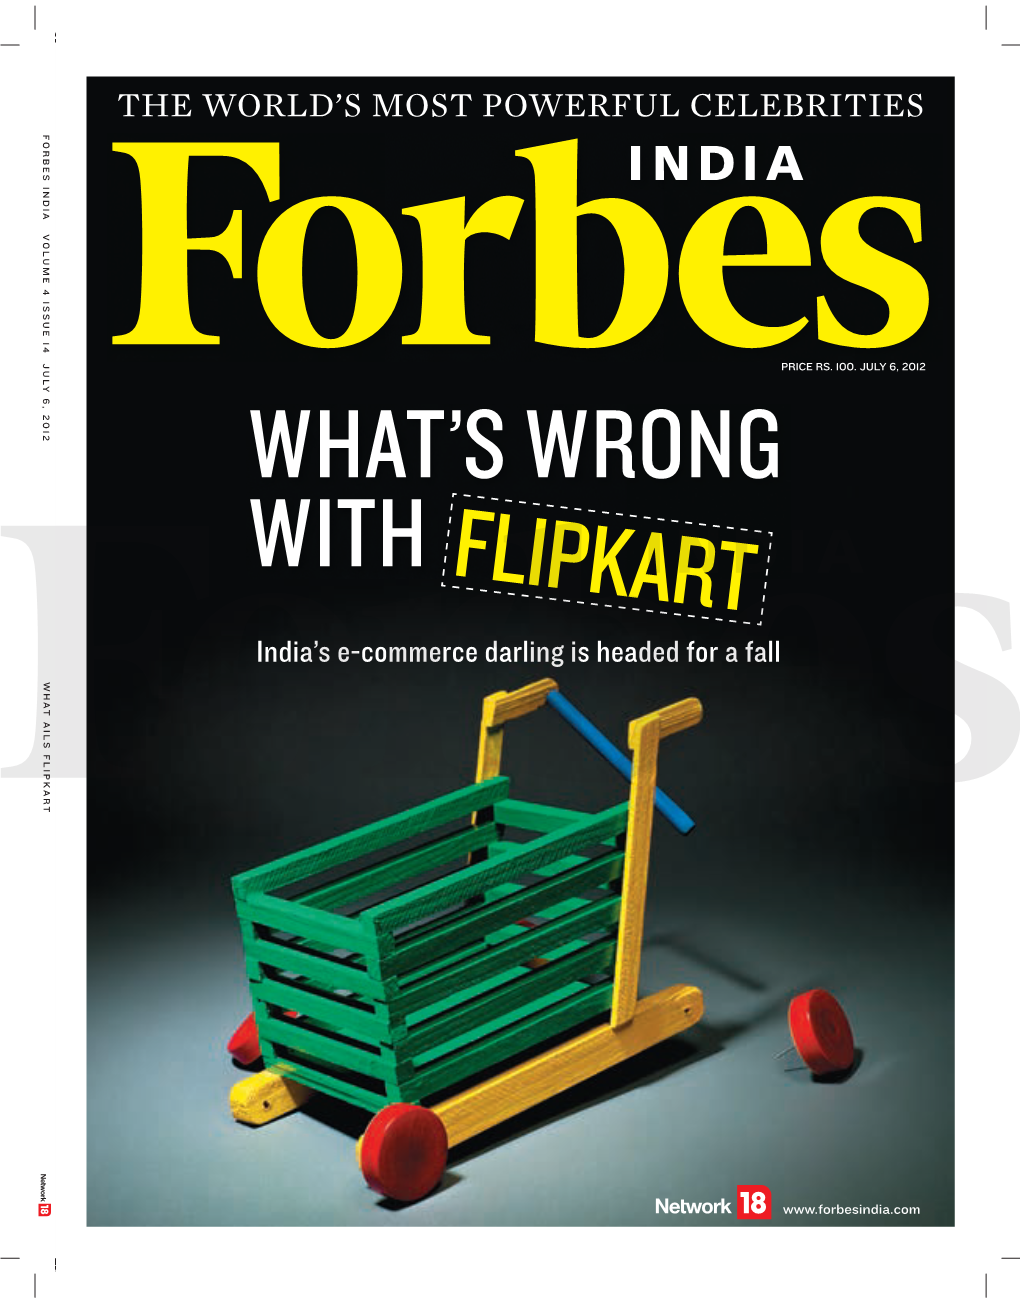 FORBES INDIA VOLUME 4 ISSUE 14 JULY 6, 2012 WHAT AILS FLIPKART Letter from the Editor